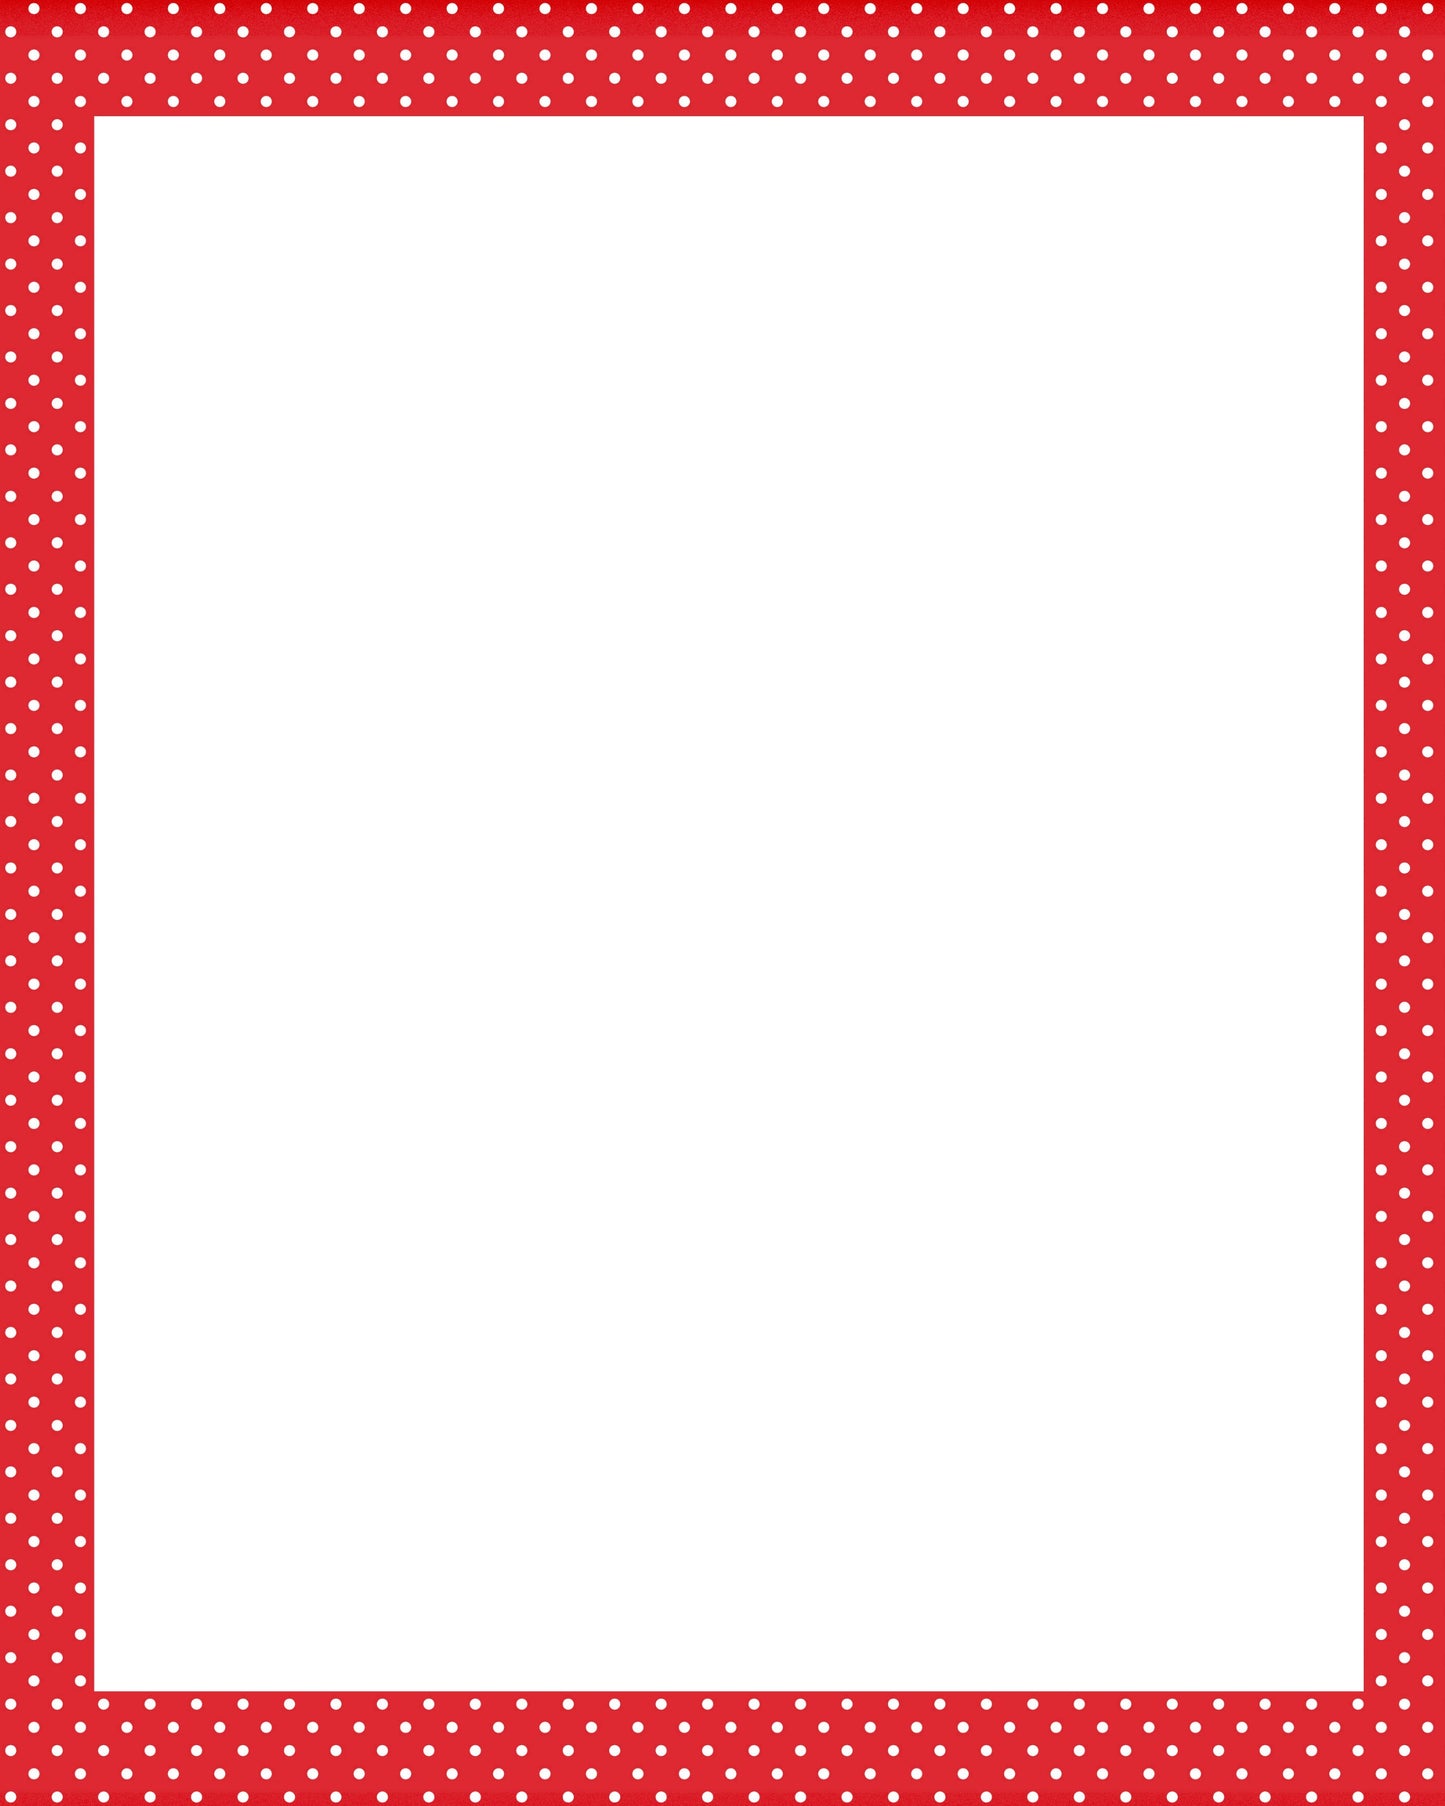 Red & White Polkadots Letterhead - Stationery - Frame - 8x10 Page Background